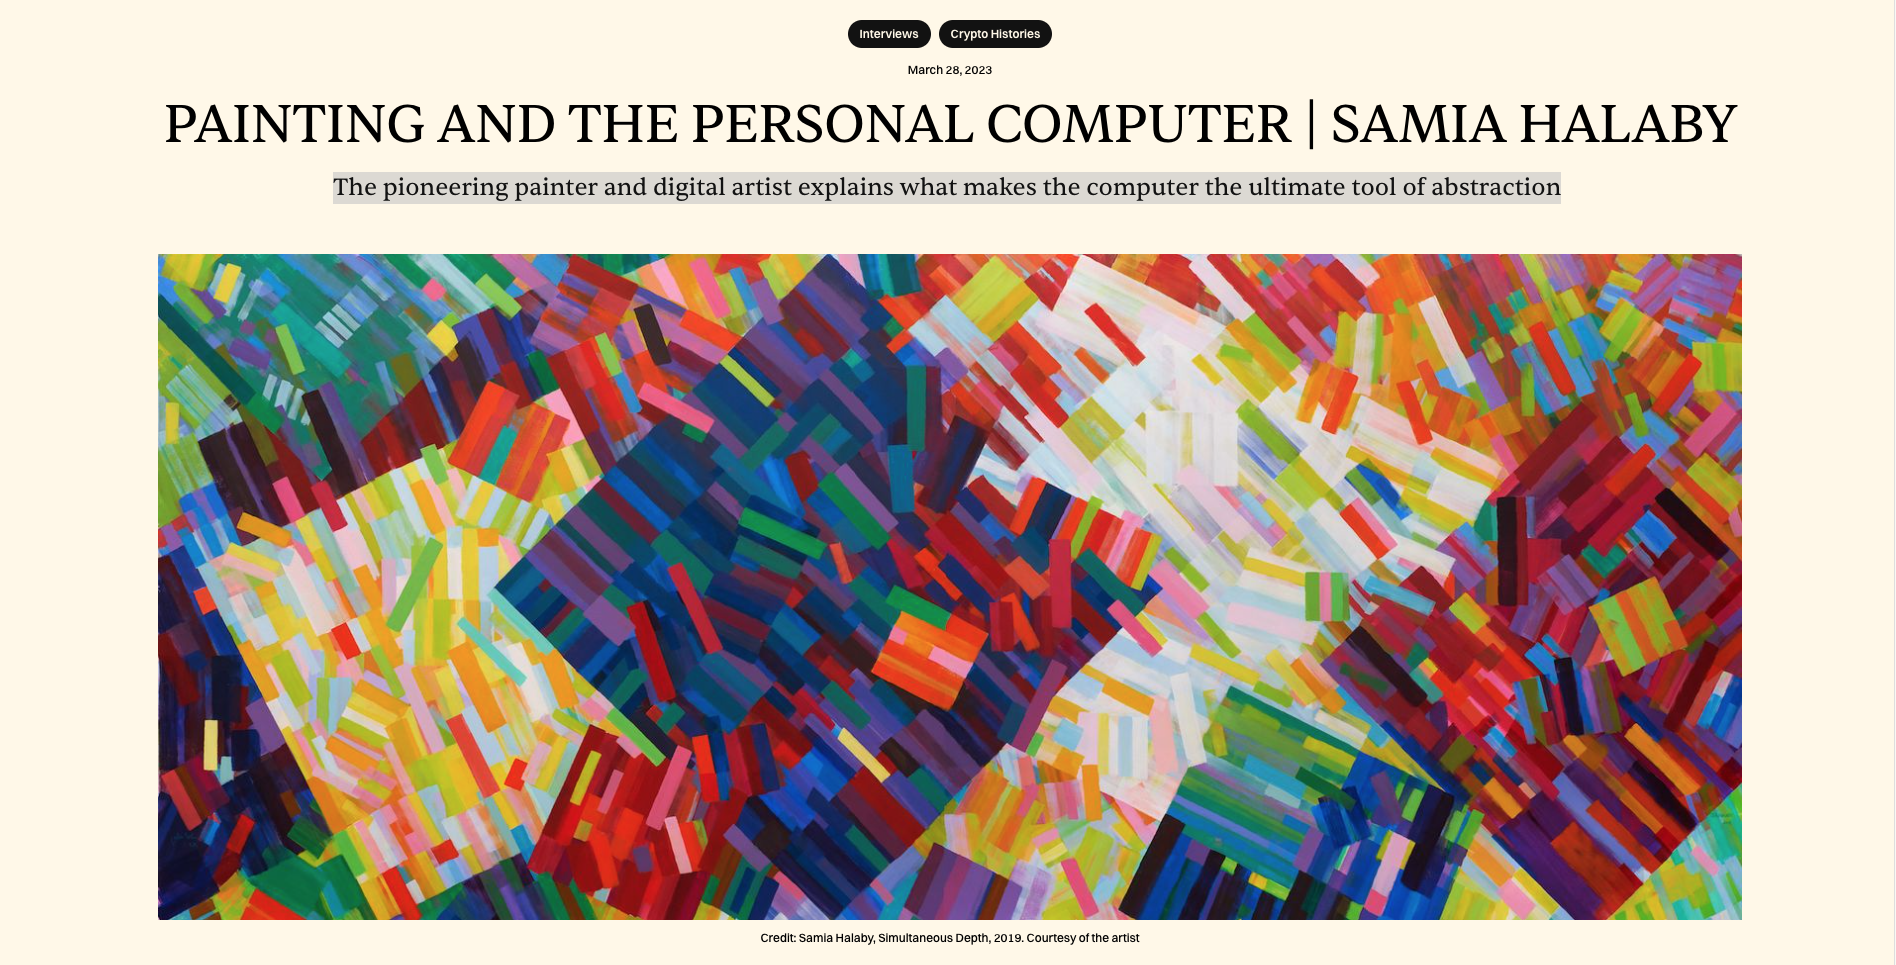 Samia Halaby "PAINTING AND THE PERSONAL COMPUTER | SAMIA HALABY", — Alex Estorick | via Right Click Save, March 28, 2023